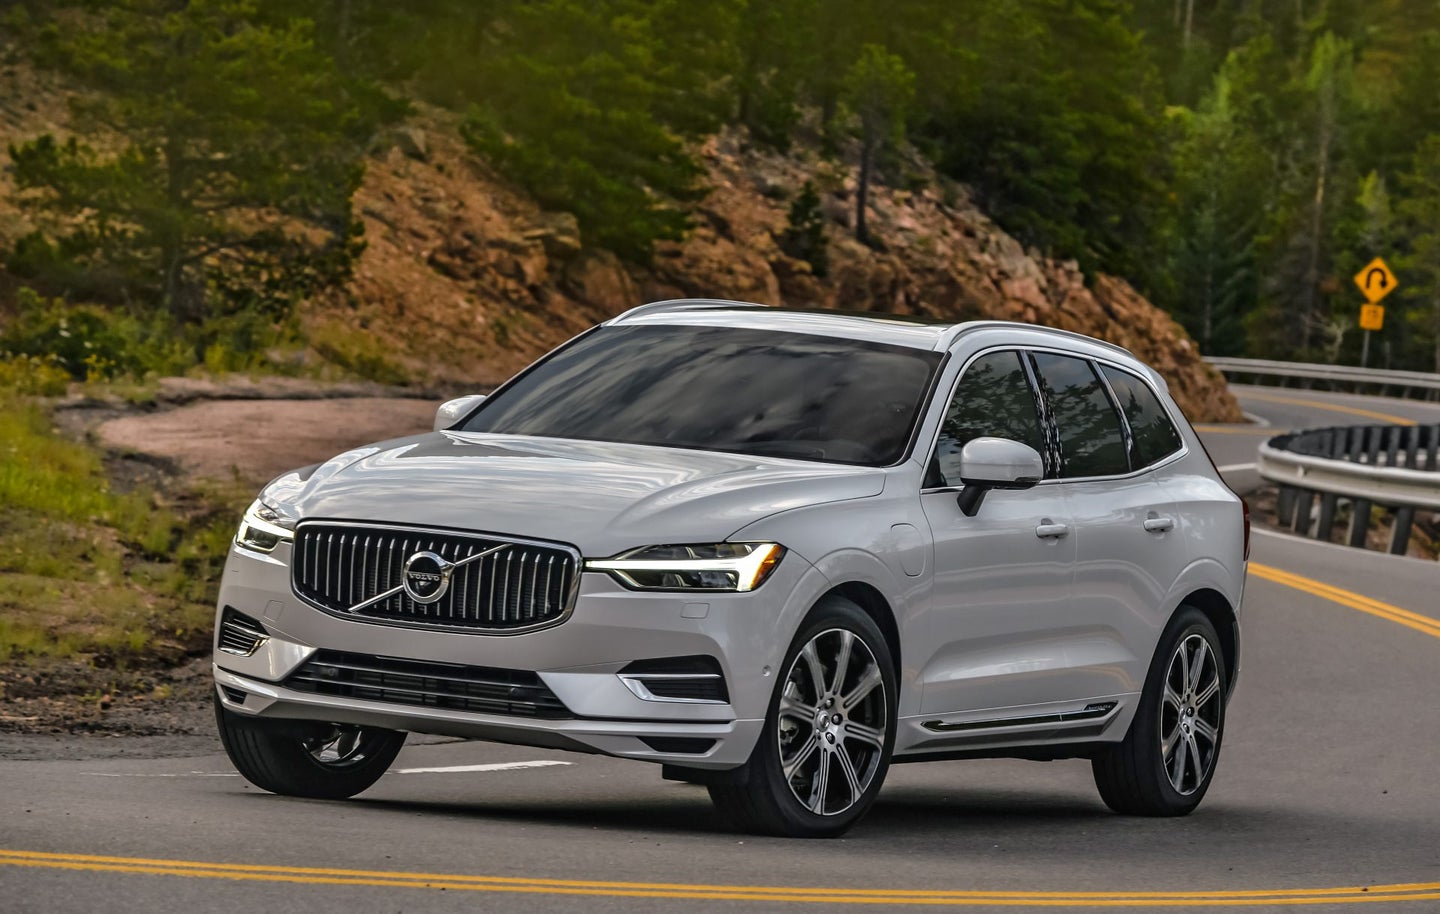 2018 Volvo XC60 T8 Review: Loads of Impressive Tech, Not That You’d Notice—and That’s the Point